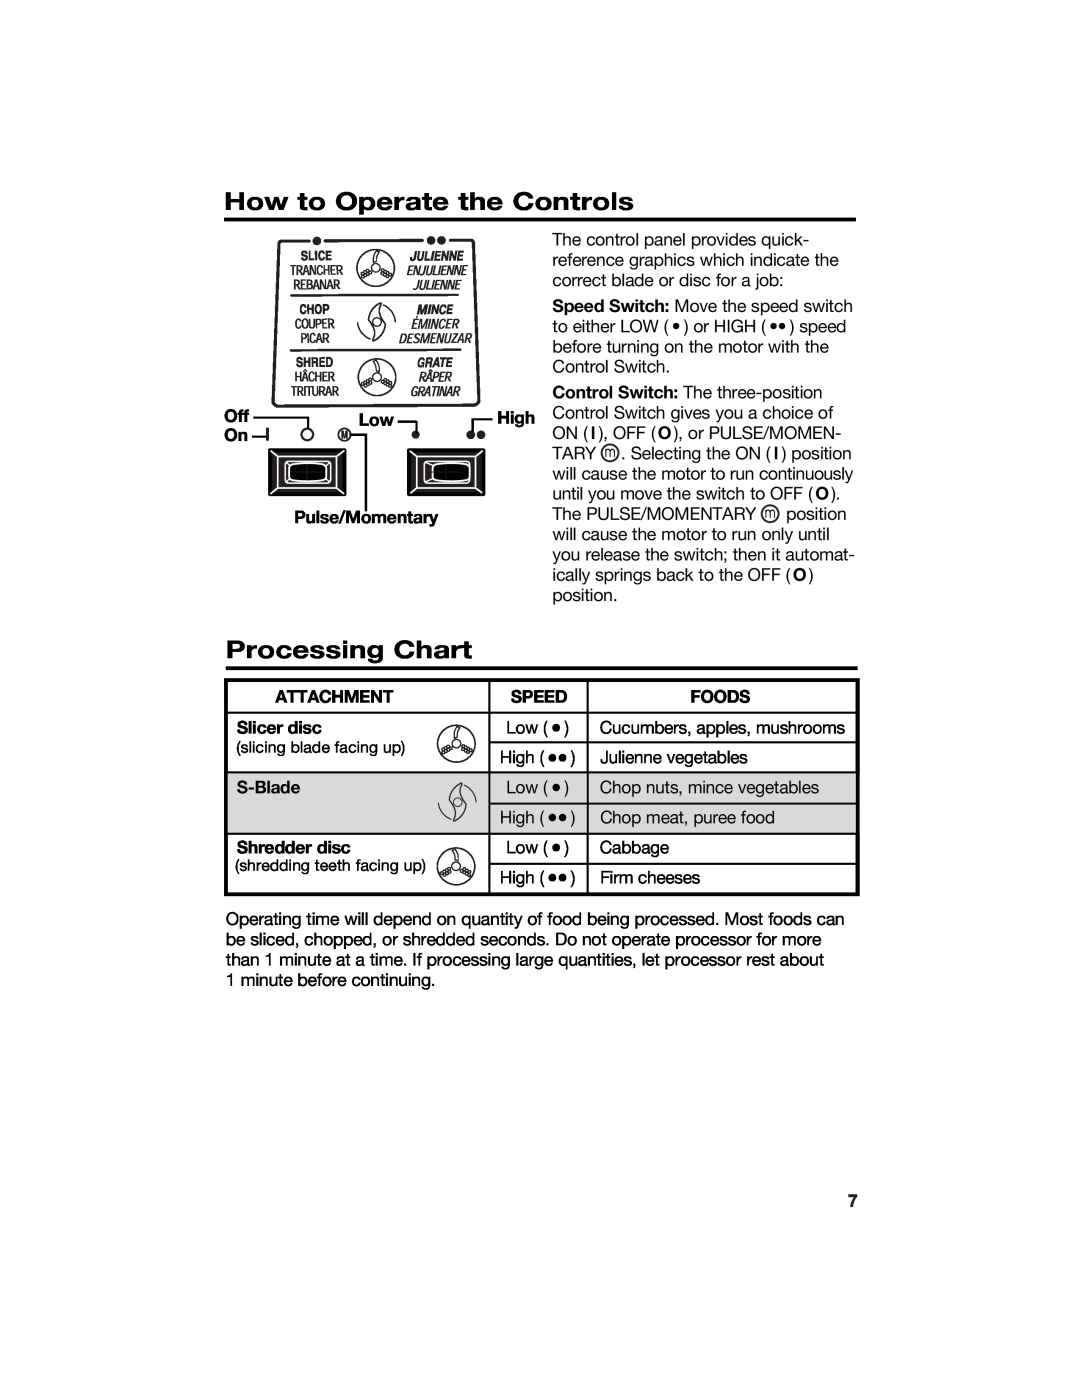 Hamilton Beach 840066200 How to Operate the Controls, Processing Chart, Pulse/Momentary, Attachment, Speed, Foods, S-Blade 